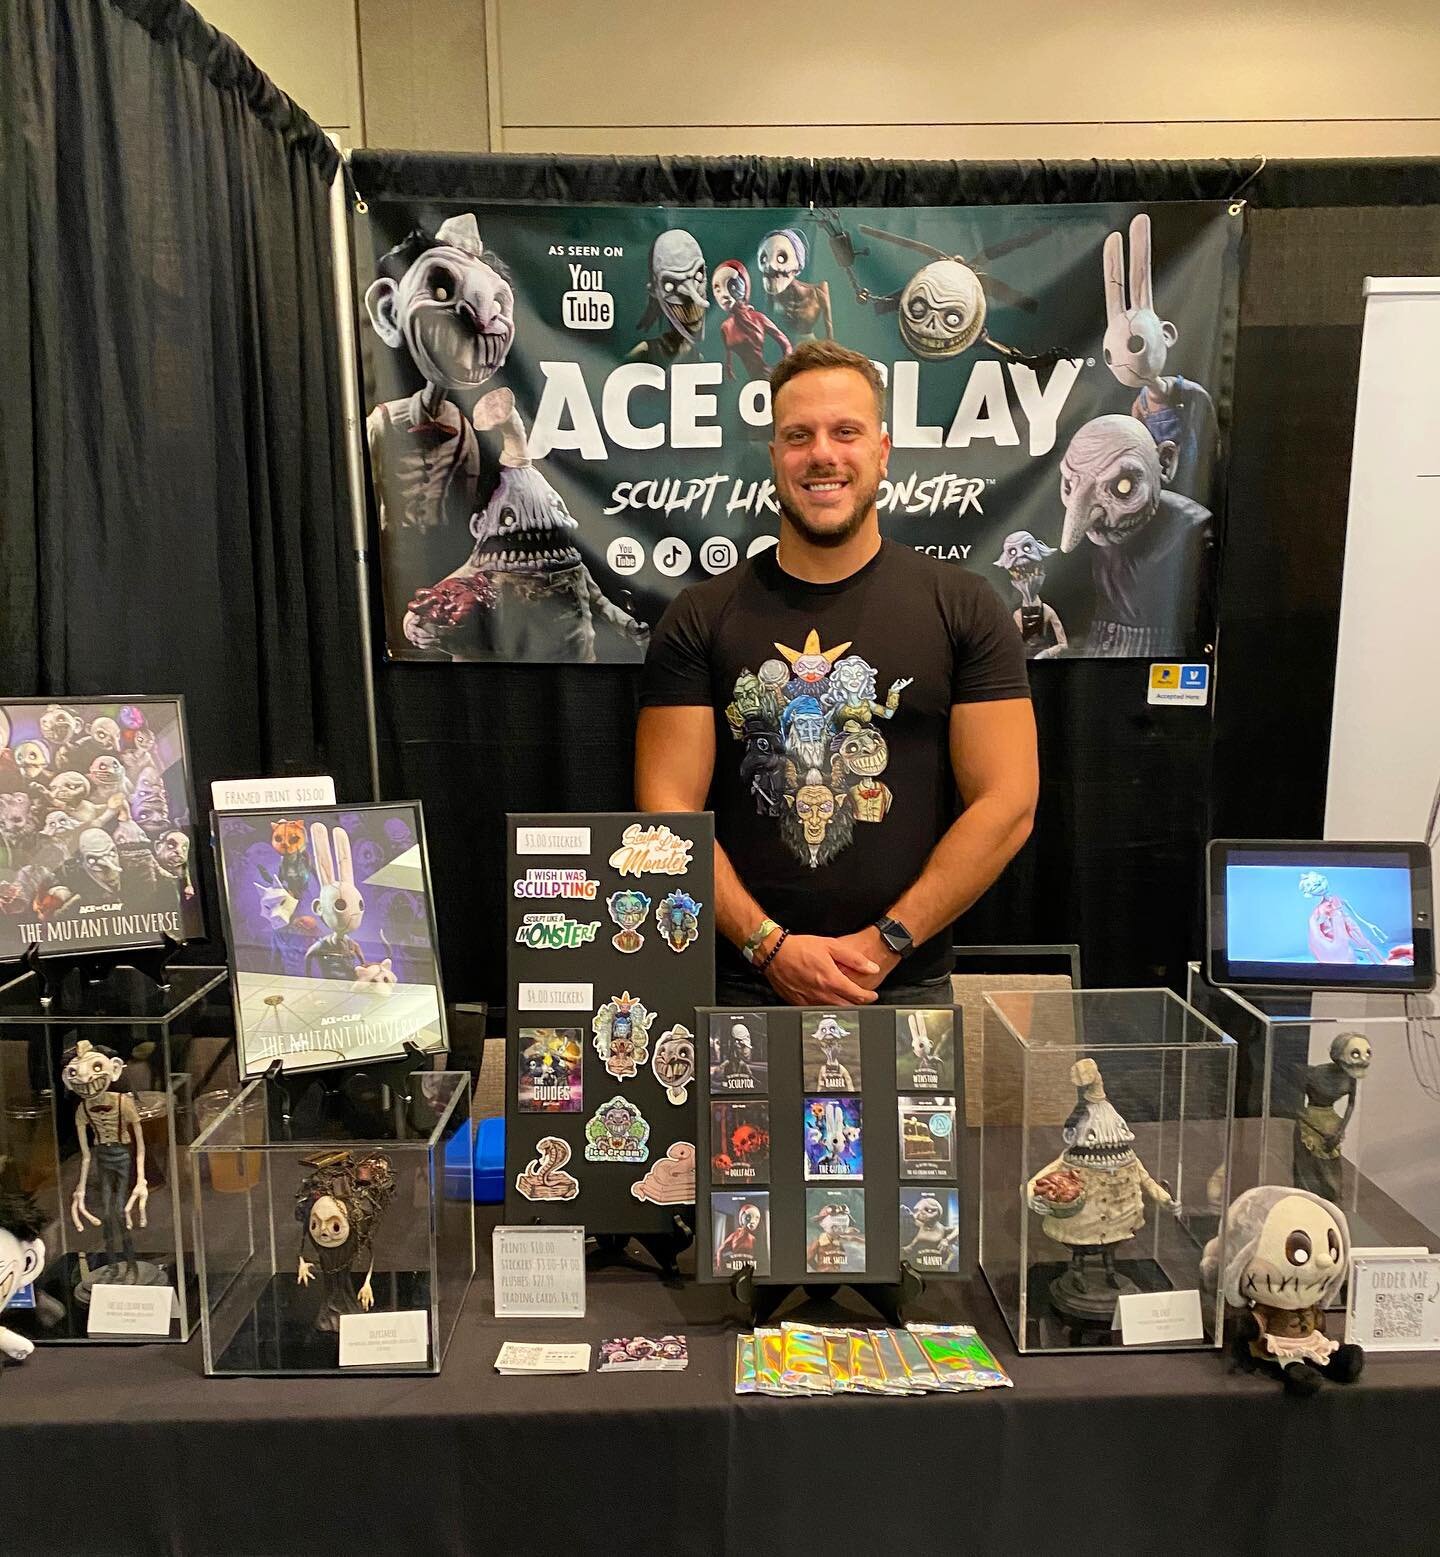 Let&rsquo;s do this @monsterpaloozaofficial! If you&rsquo;re going this weekend be sure to stop by and say hi 😁. Marriott Burbank Convention Center #aceofclay #sonofmonsterpalooza